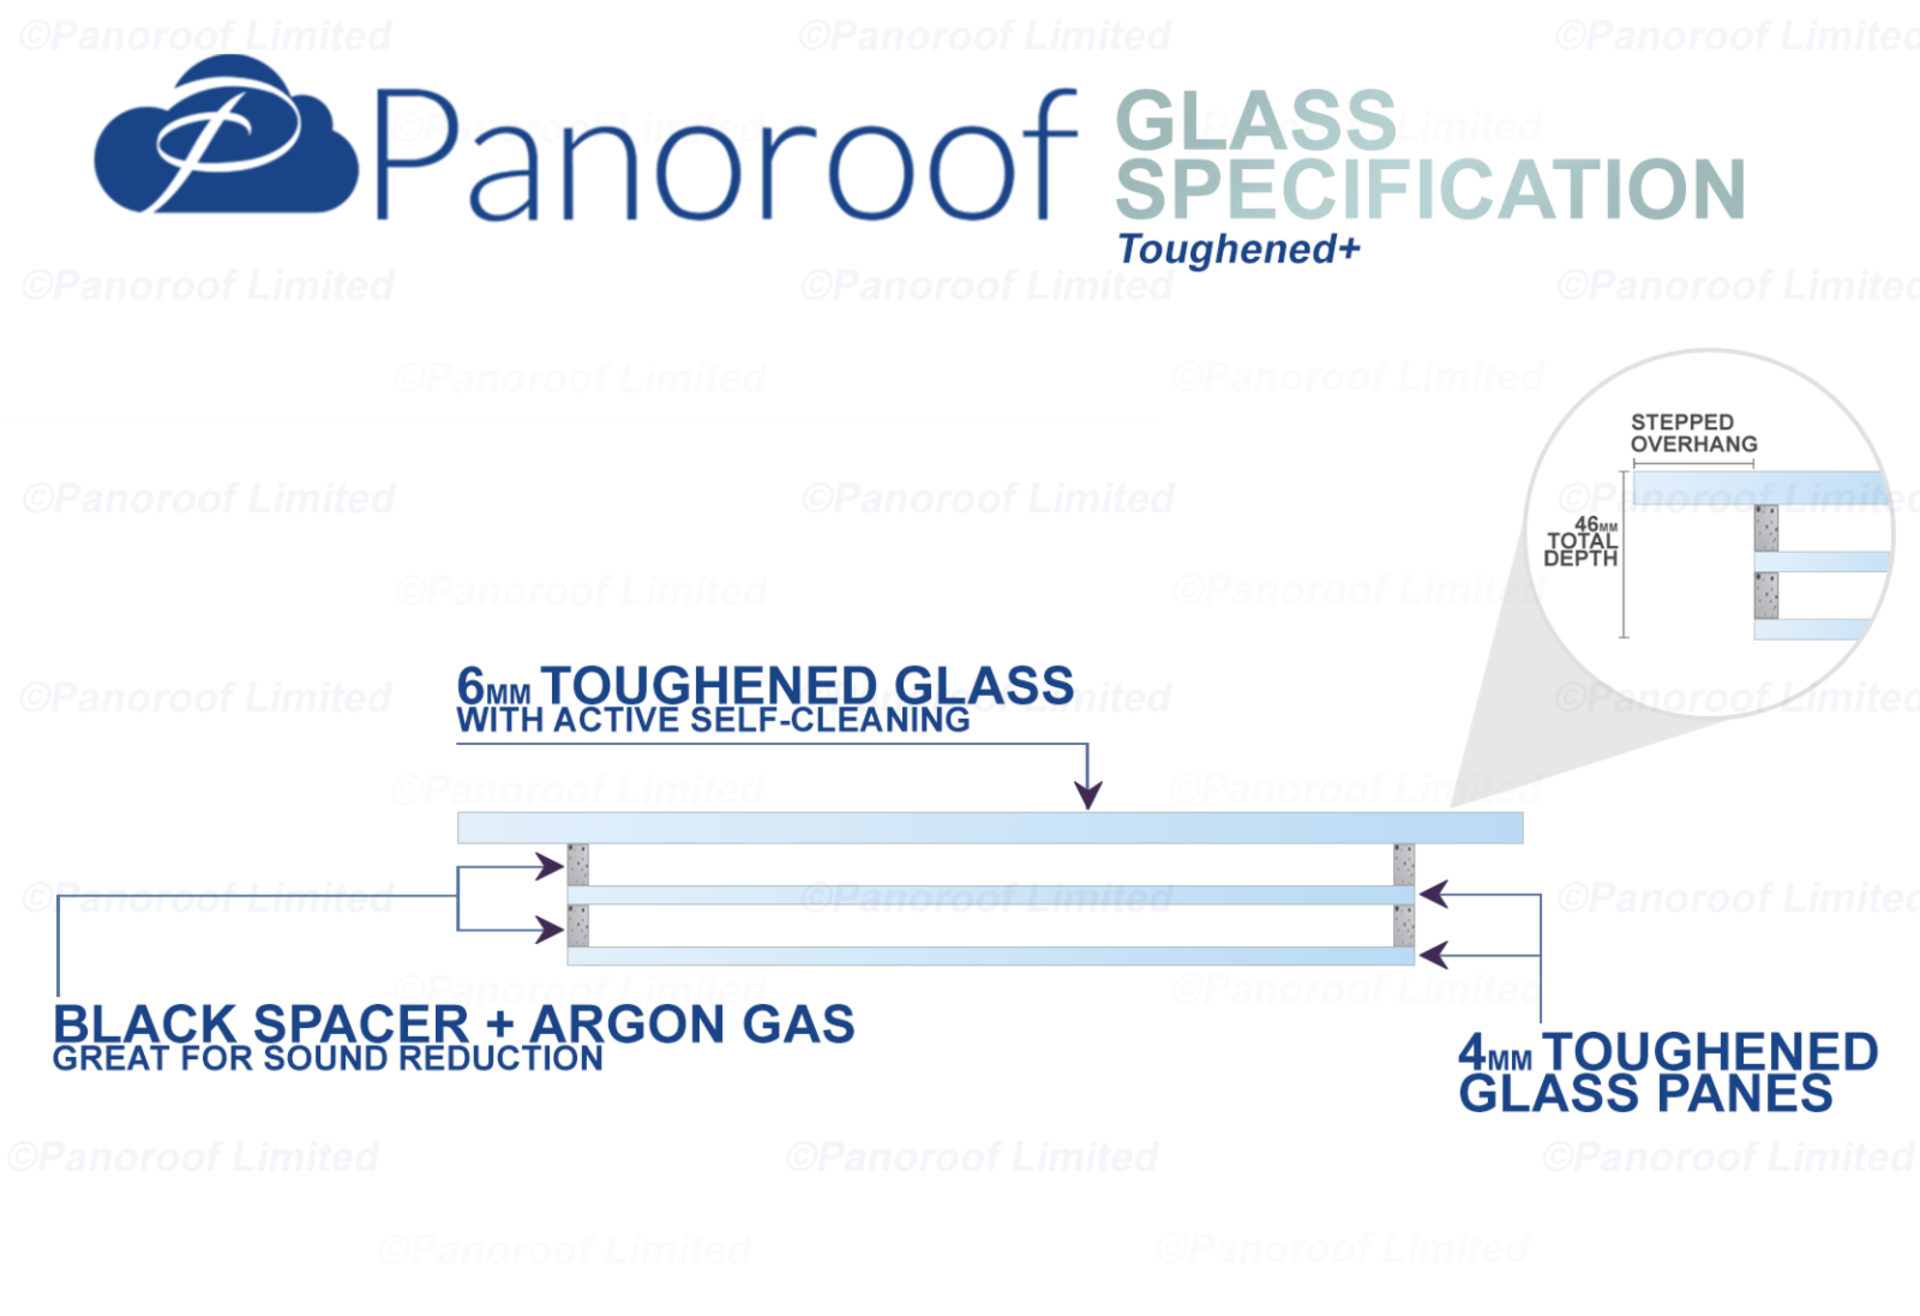 """Panoroof Triple Glazed Self Cleaning 400x400mm (inside Size Visable glass area) Seamless Glass - Image 5 of 6